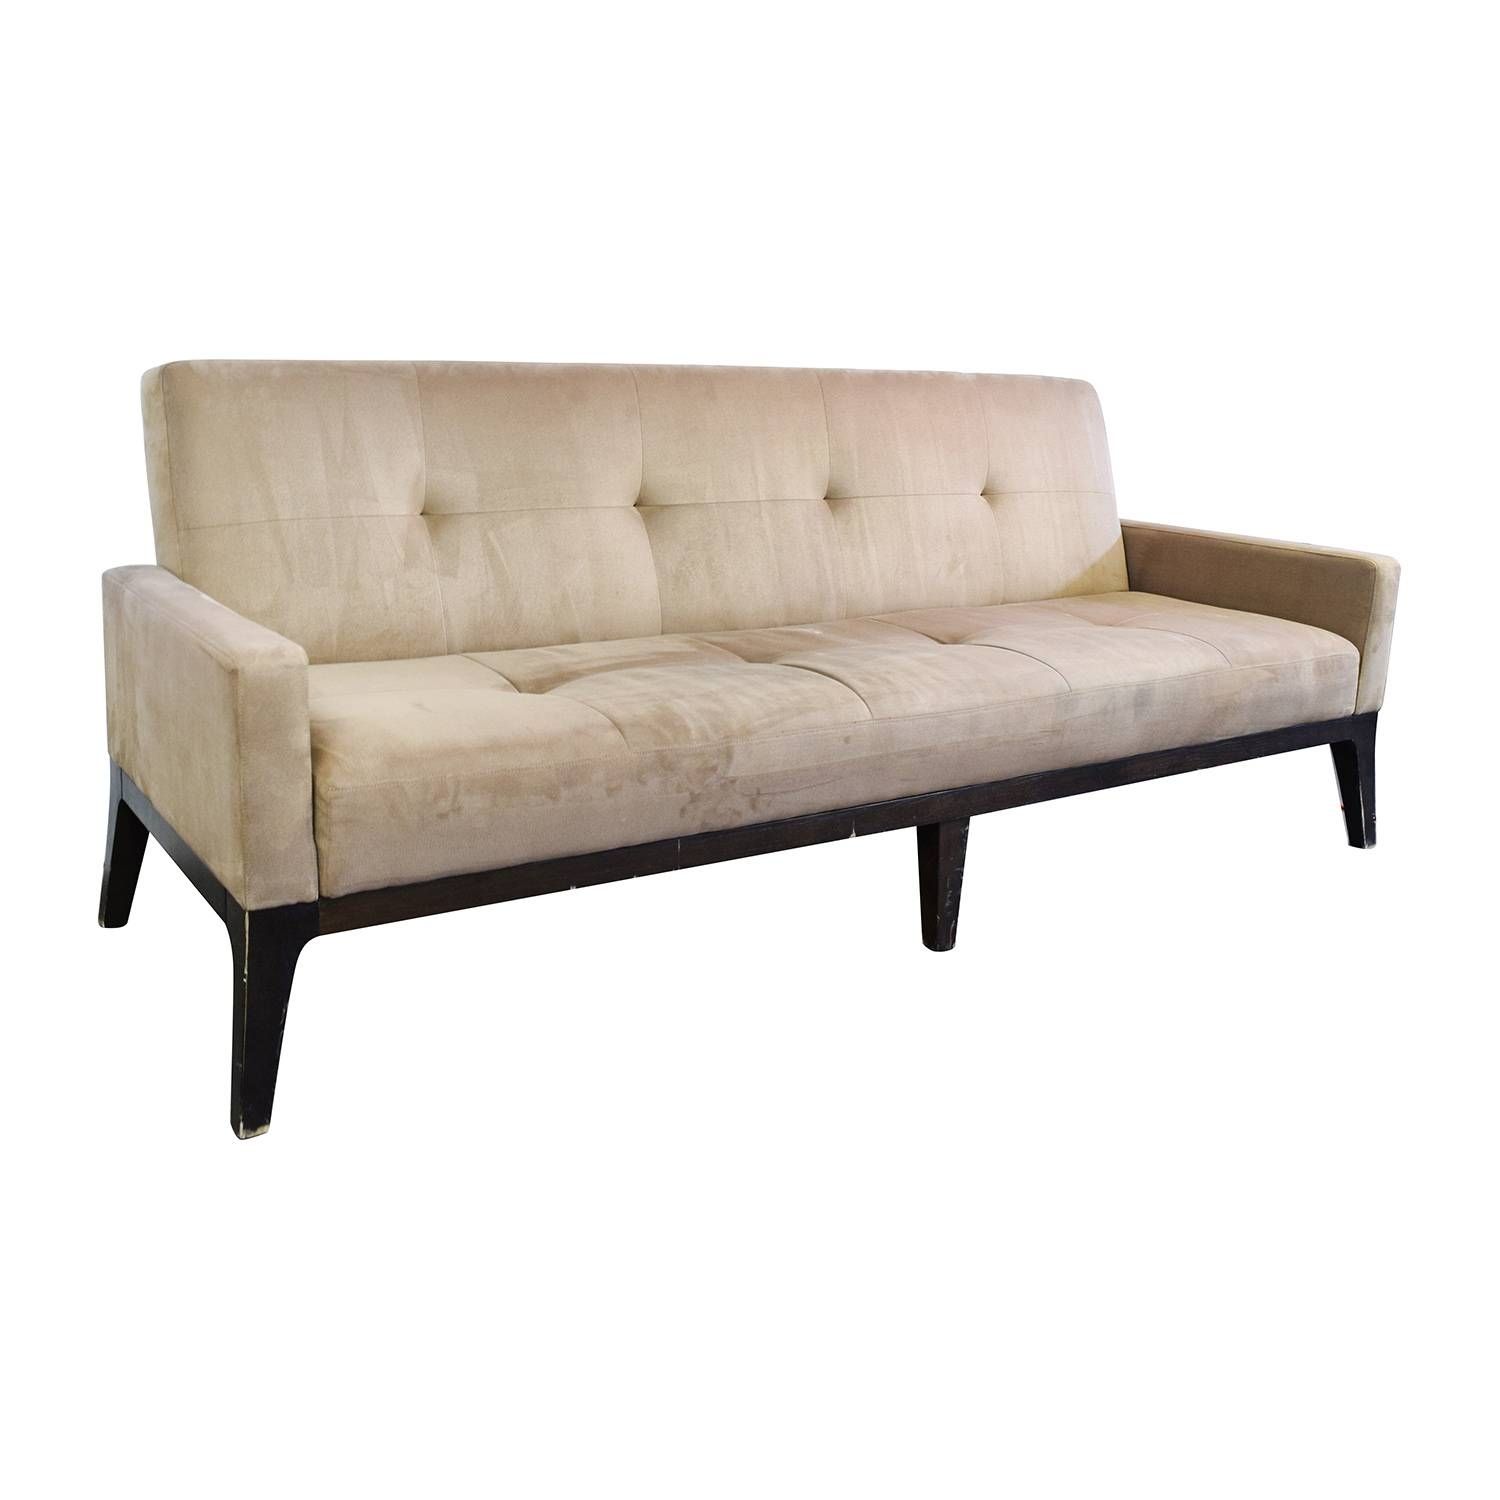 82% Off – Crate And Barrel Crate & Barrel Beige Tufted Futon Sofa Pertaining To Crate And Barrel Futon Sofas (View 3 of 15)